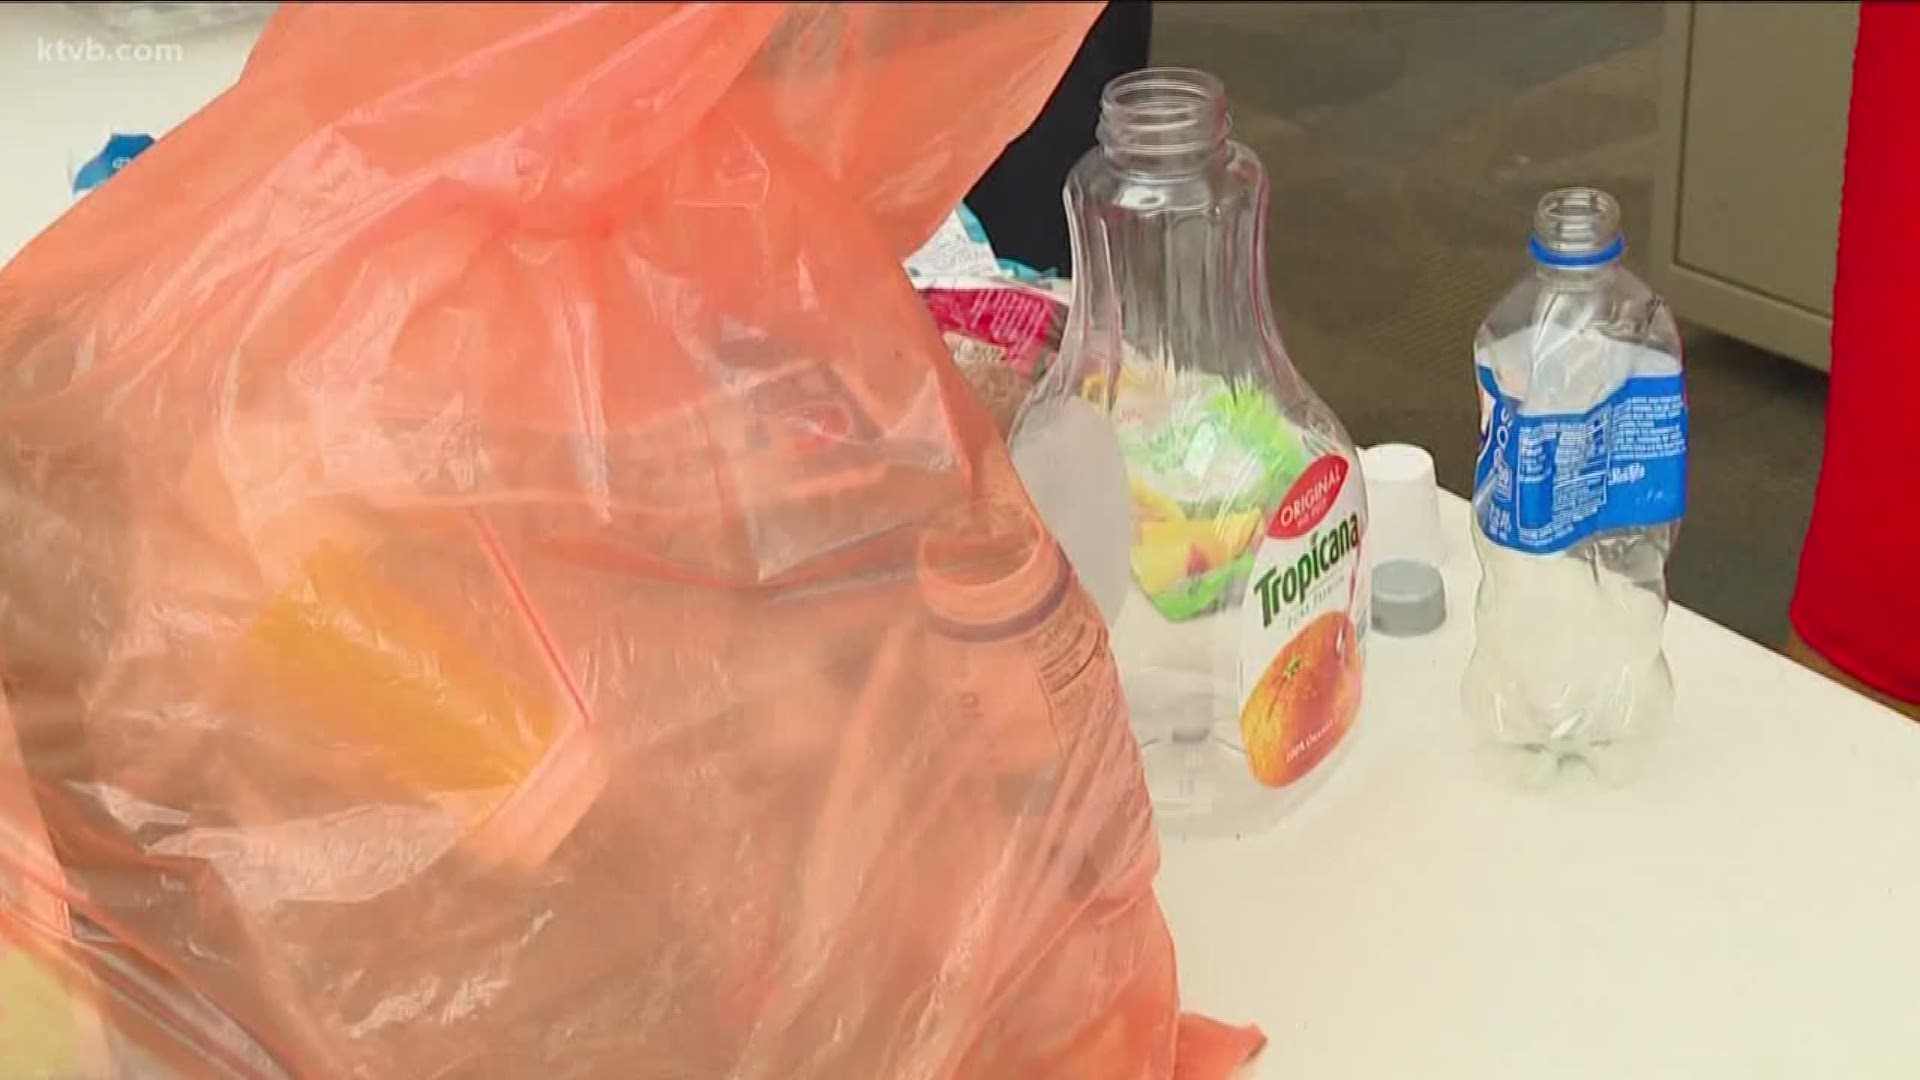 So which type of recyclables go in the orange bags?